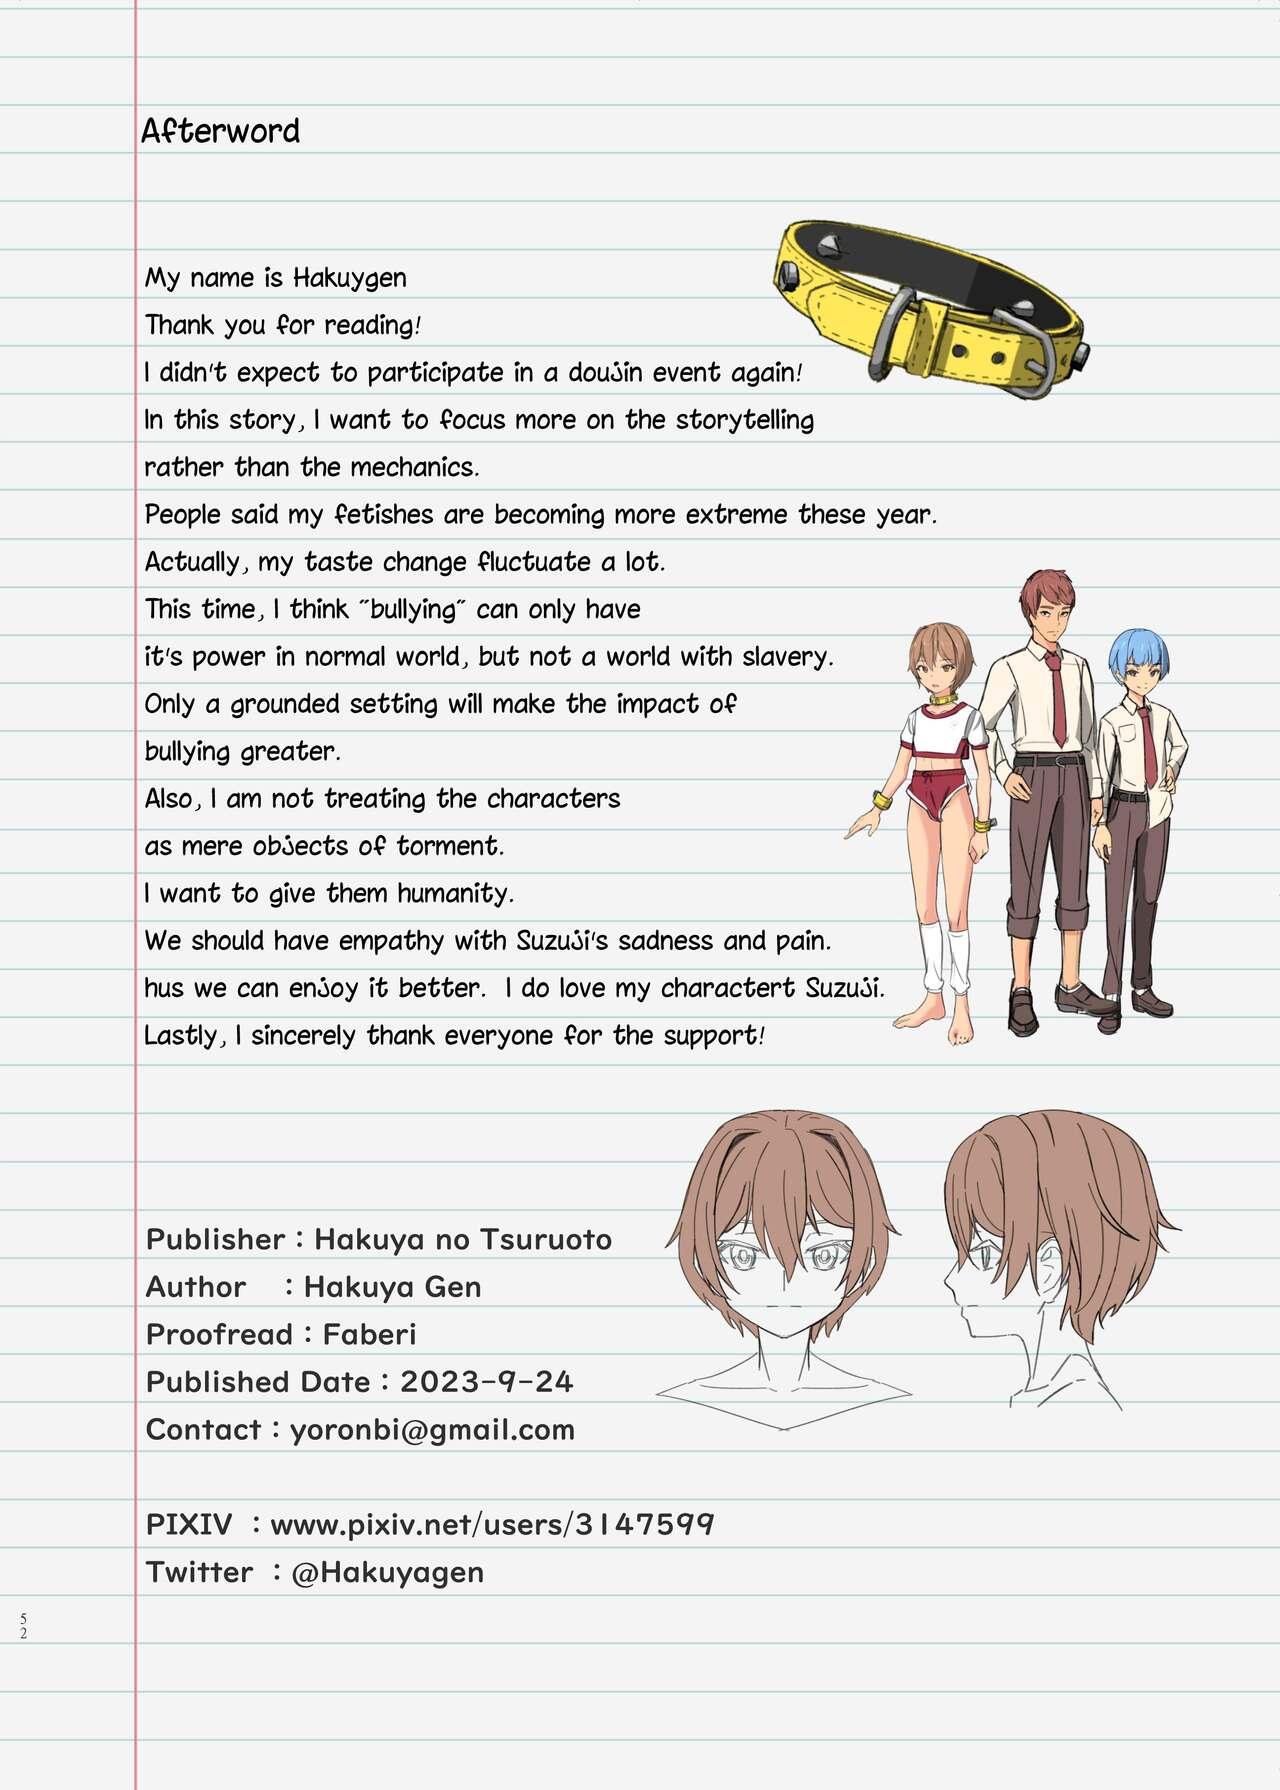 Shared Class Toy: The Daily Physical Punishments of Suzuji 51